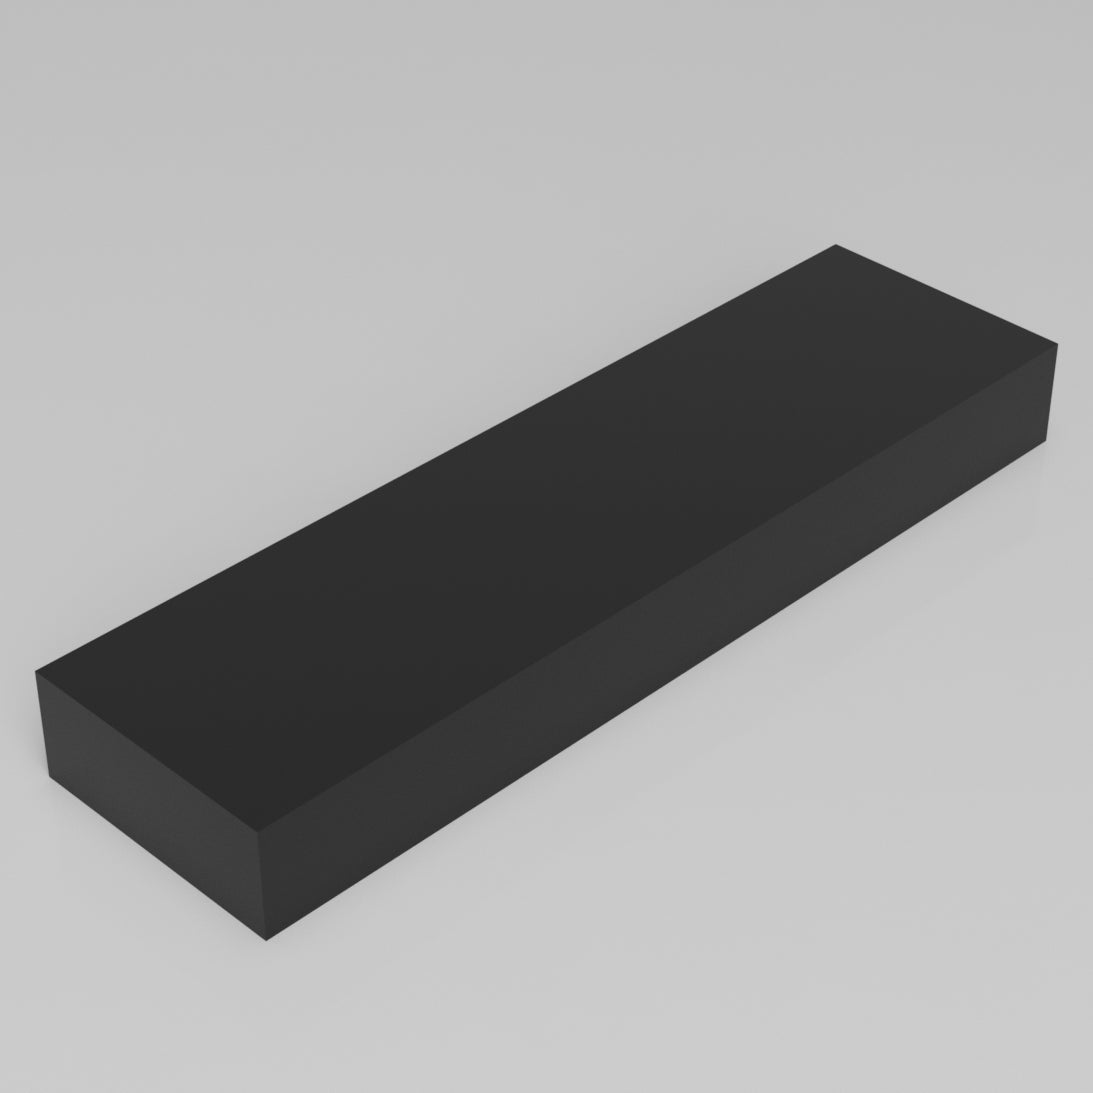 Machinable Wax Rectangular Block Front View 2 Inch by 5 Inch by 18 Inch